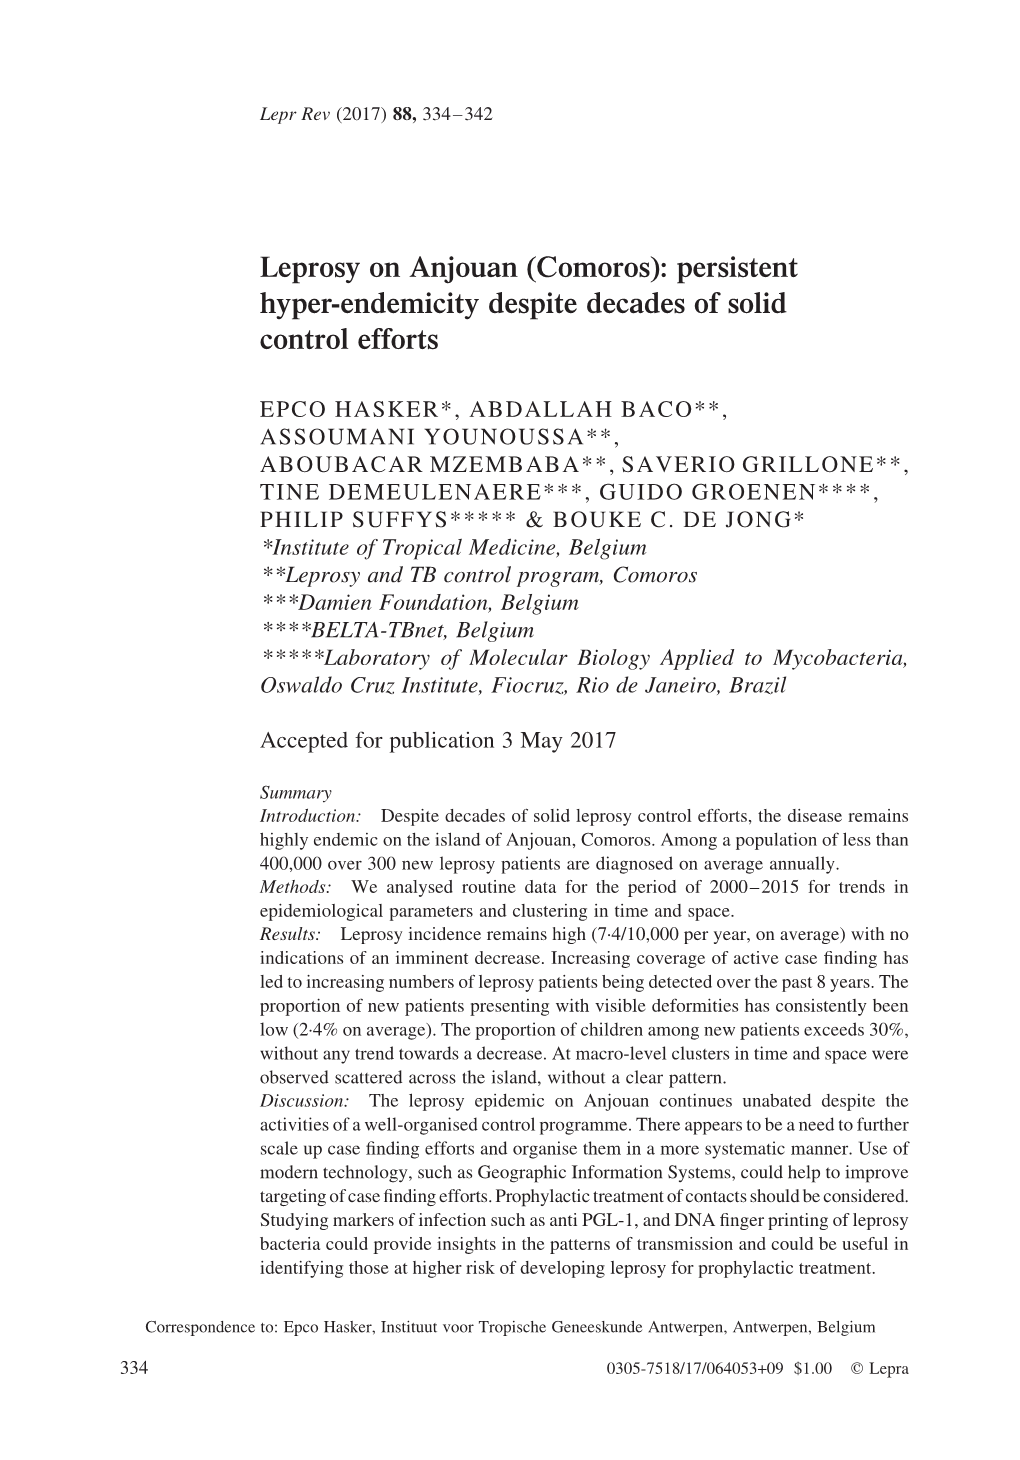 Leprosy on Anjouan (Comoros): Persistent Hyper-Endemicity Despite Decades of Solid Control Efforts